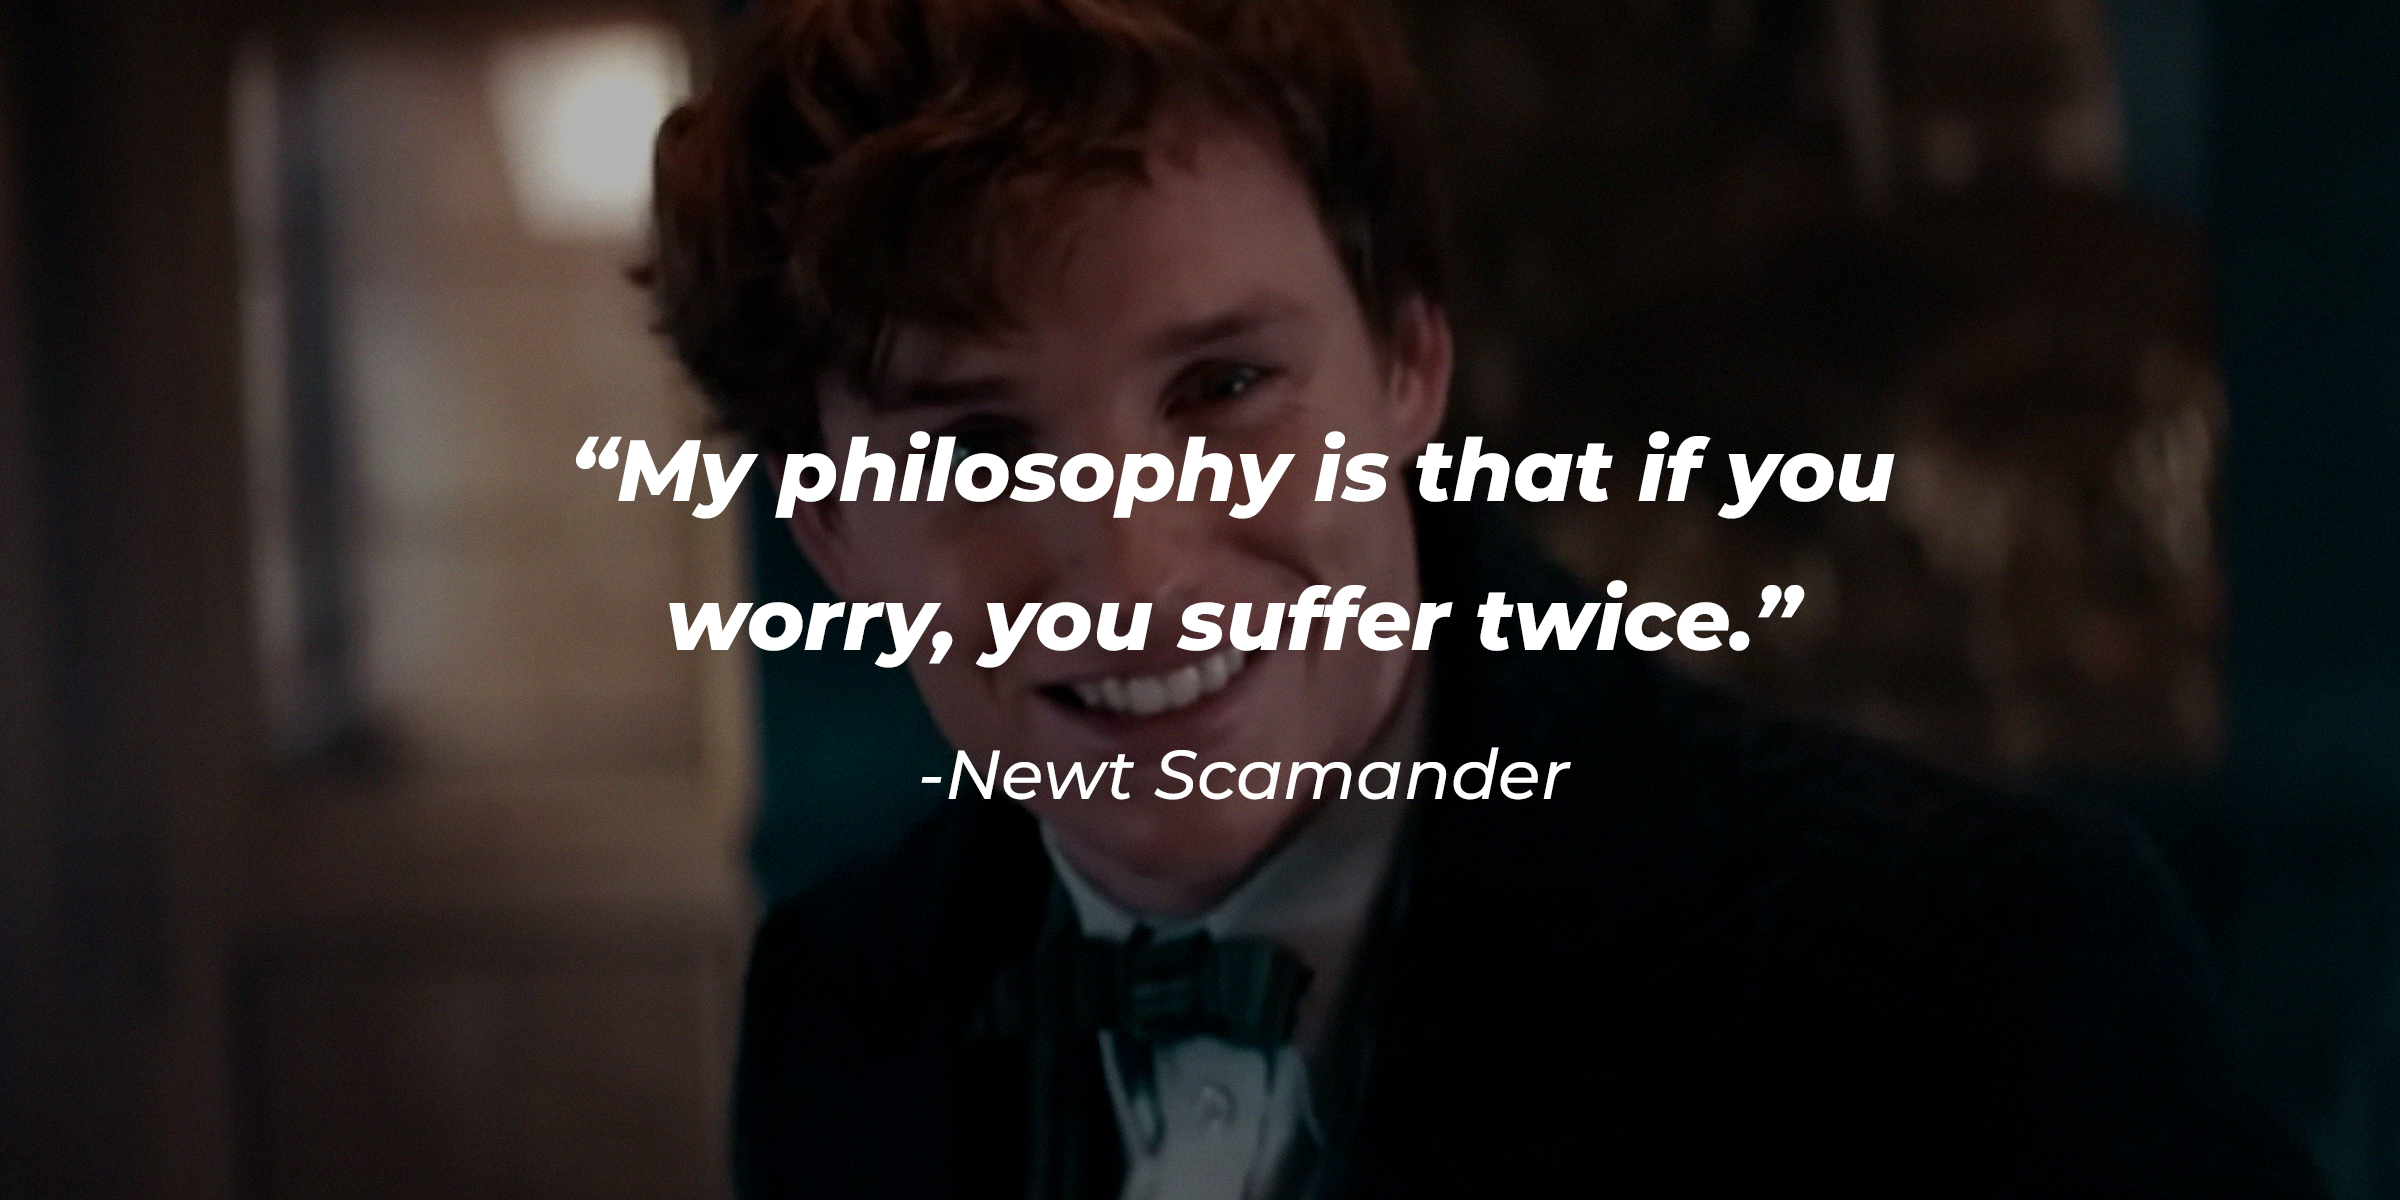 Newt Scamander with his quote: "My philosophy is that if you worry, you suffer twice." | Source: facebook.com/fantasticbeastsmovie